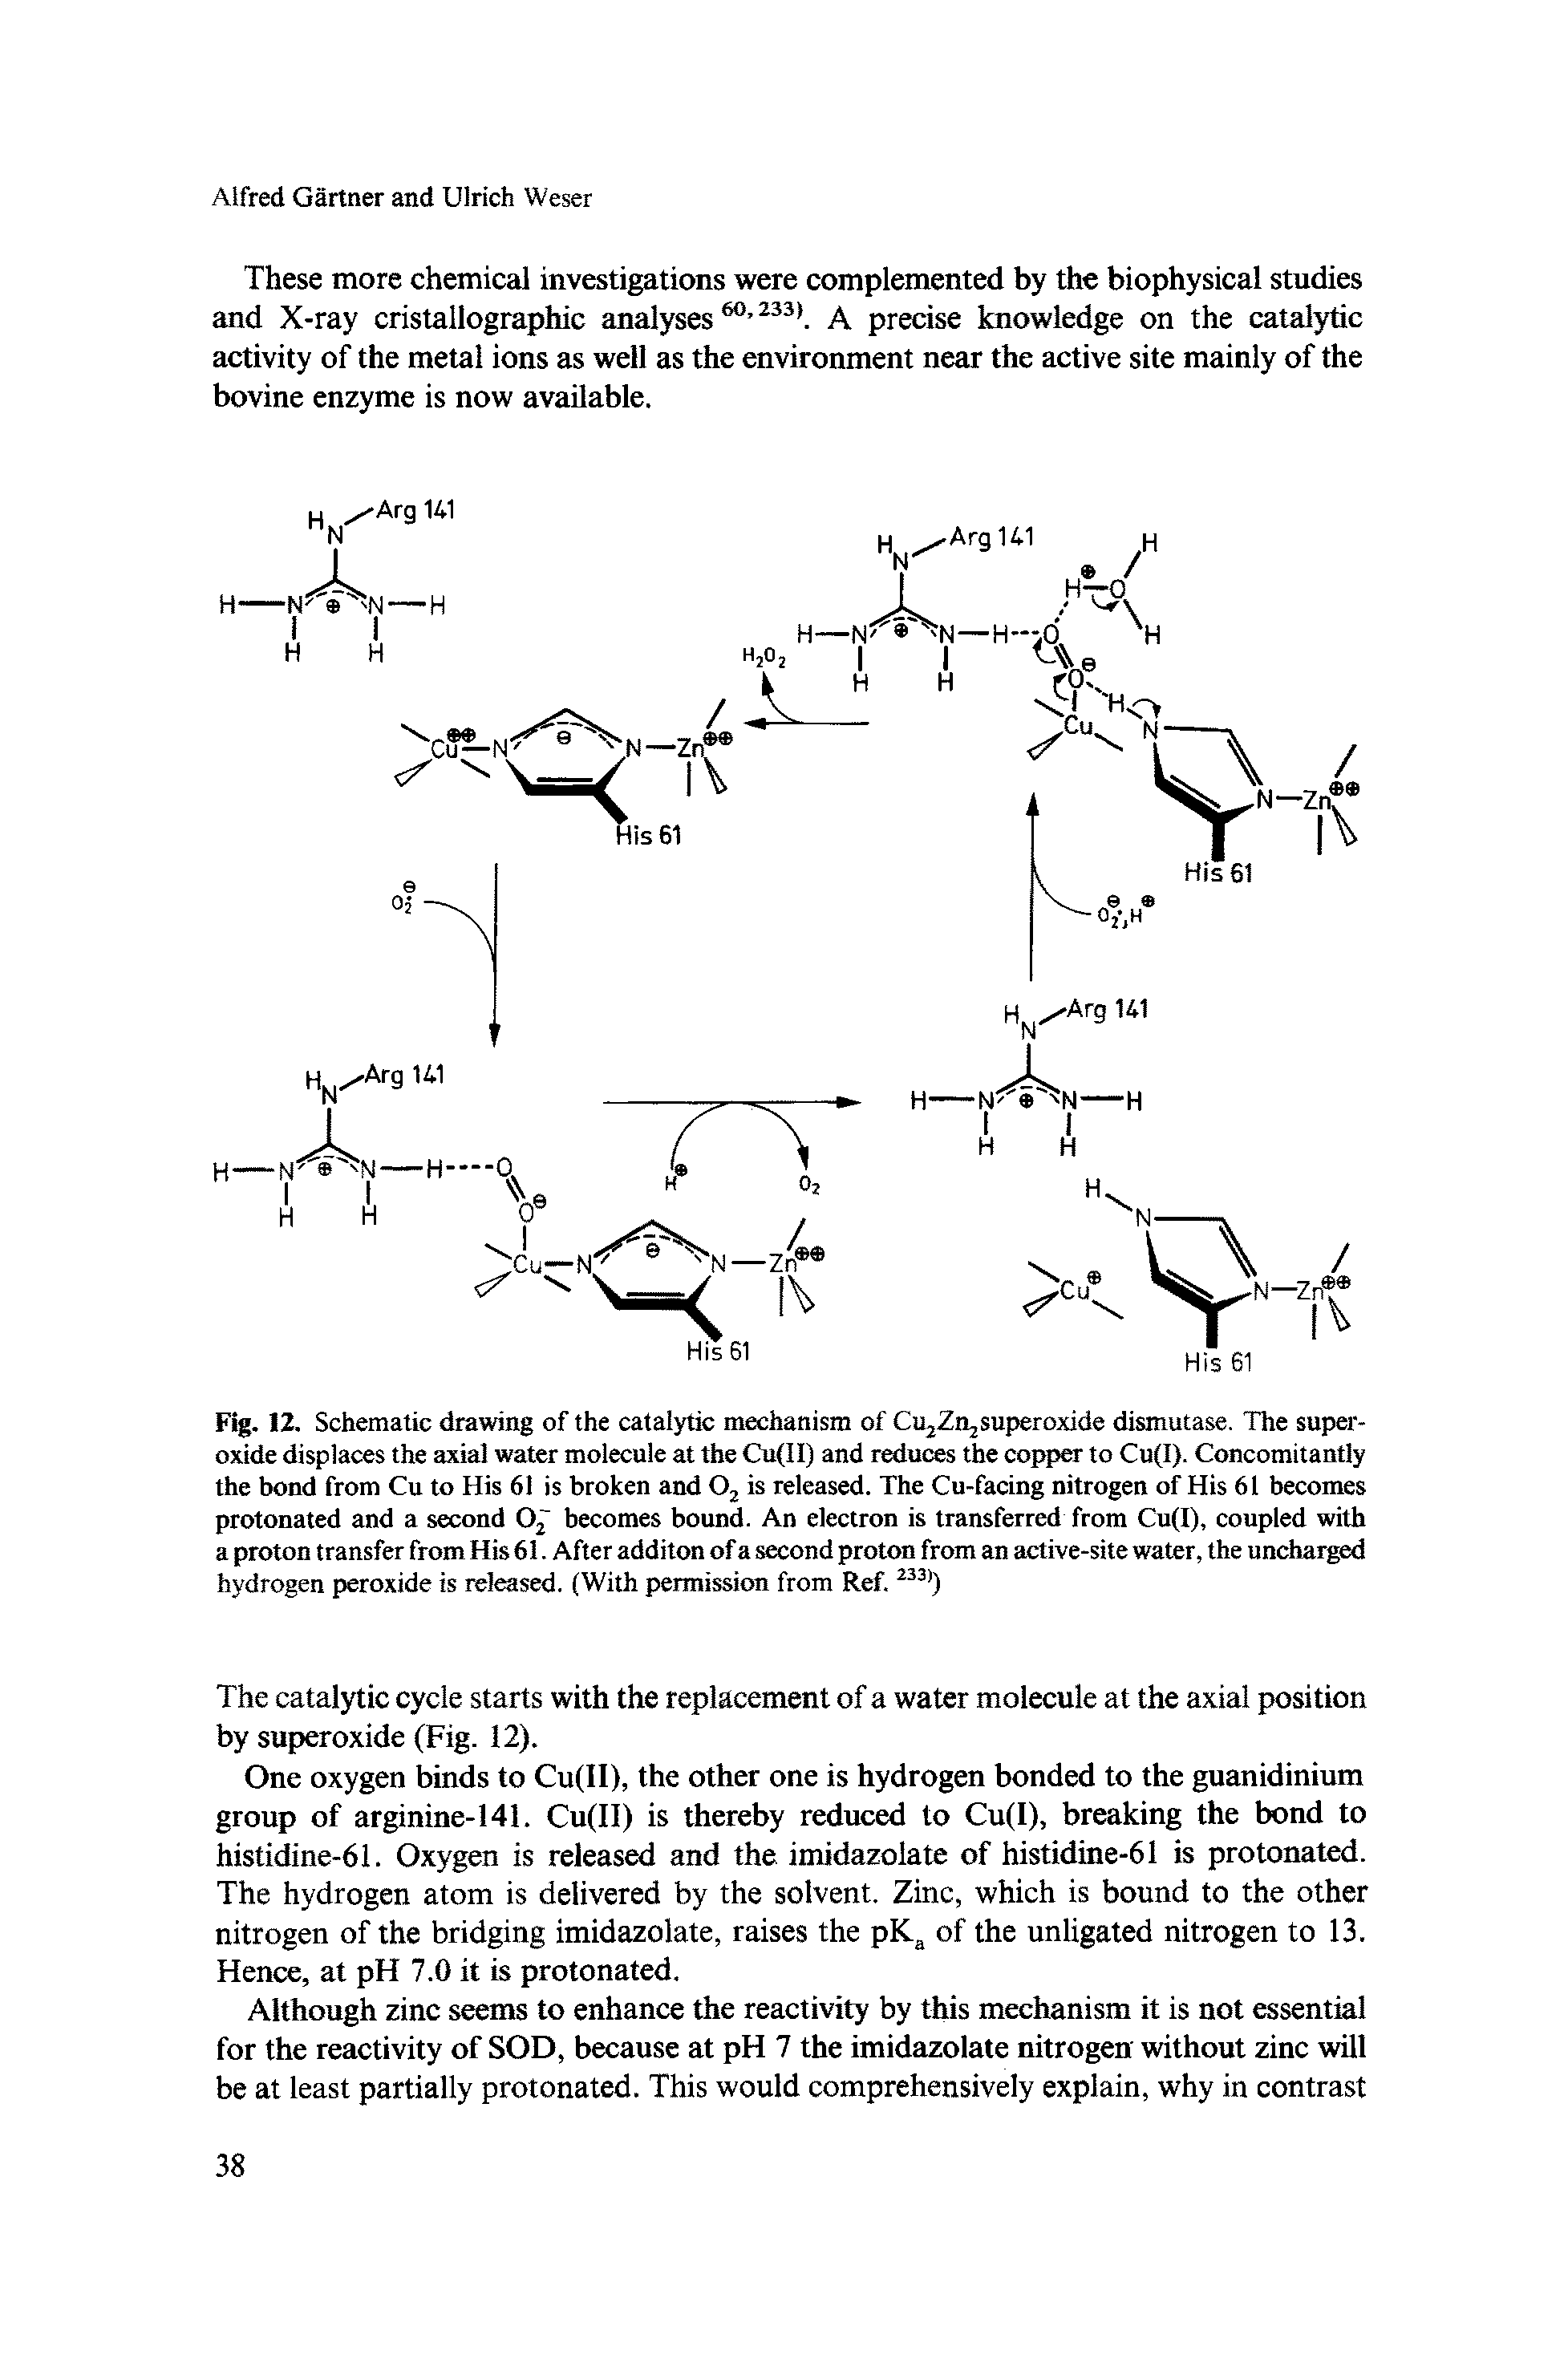 Fig. 12. Schematic drawing of the catalytic mechanism of CujZojSuperoxide dismutase. The superoxide displaces the axial water molecule at the Cu II) and reduces the copper to Cu(I). Concomitantly the bond from Cu to His 61 is broken and Oj is released. The Cu-facing nitrogen of His 61 becomes protonated and a second becomes bound. An electron is transferred from Cu(I), coupled with a proton transfer from His 61. After additon of a second proton from an active-site water, the uncharged hydrogen peroxide is rctosed. (With permission from Ref.